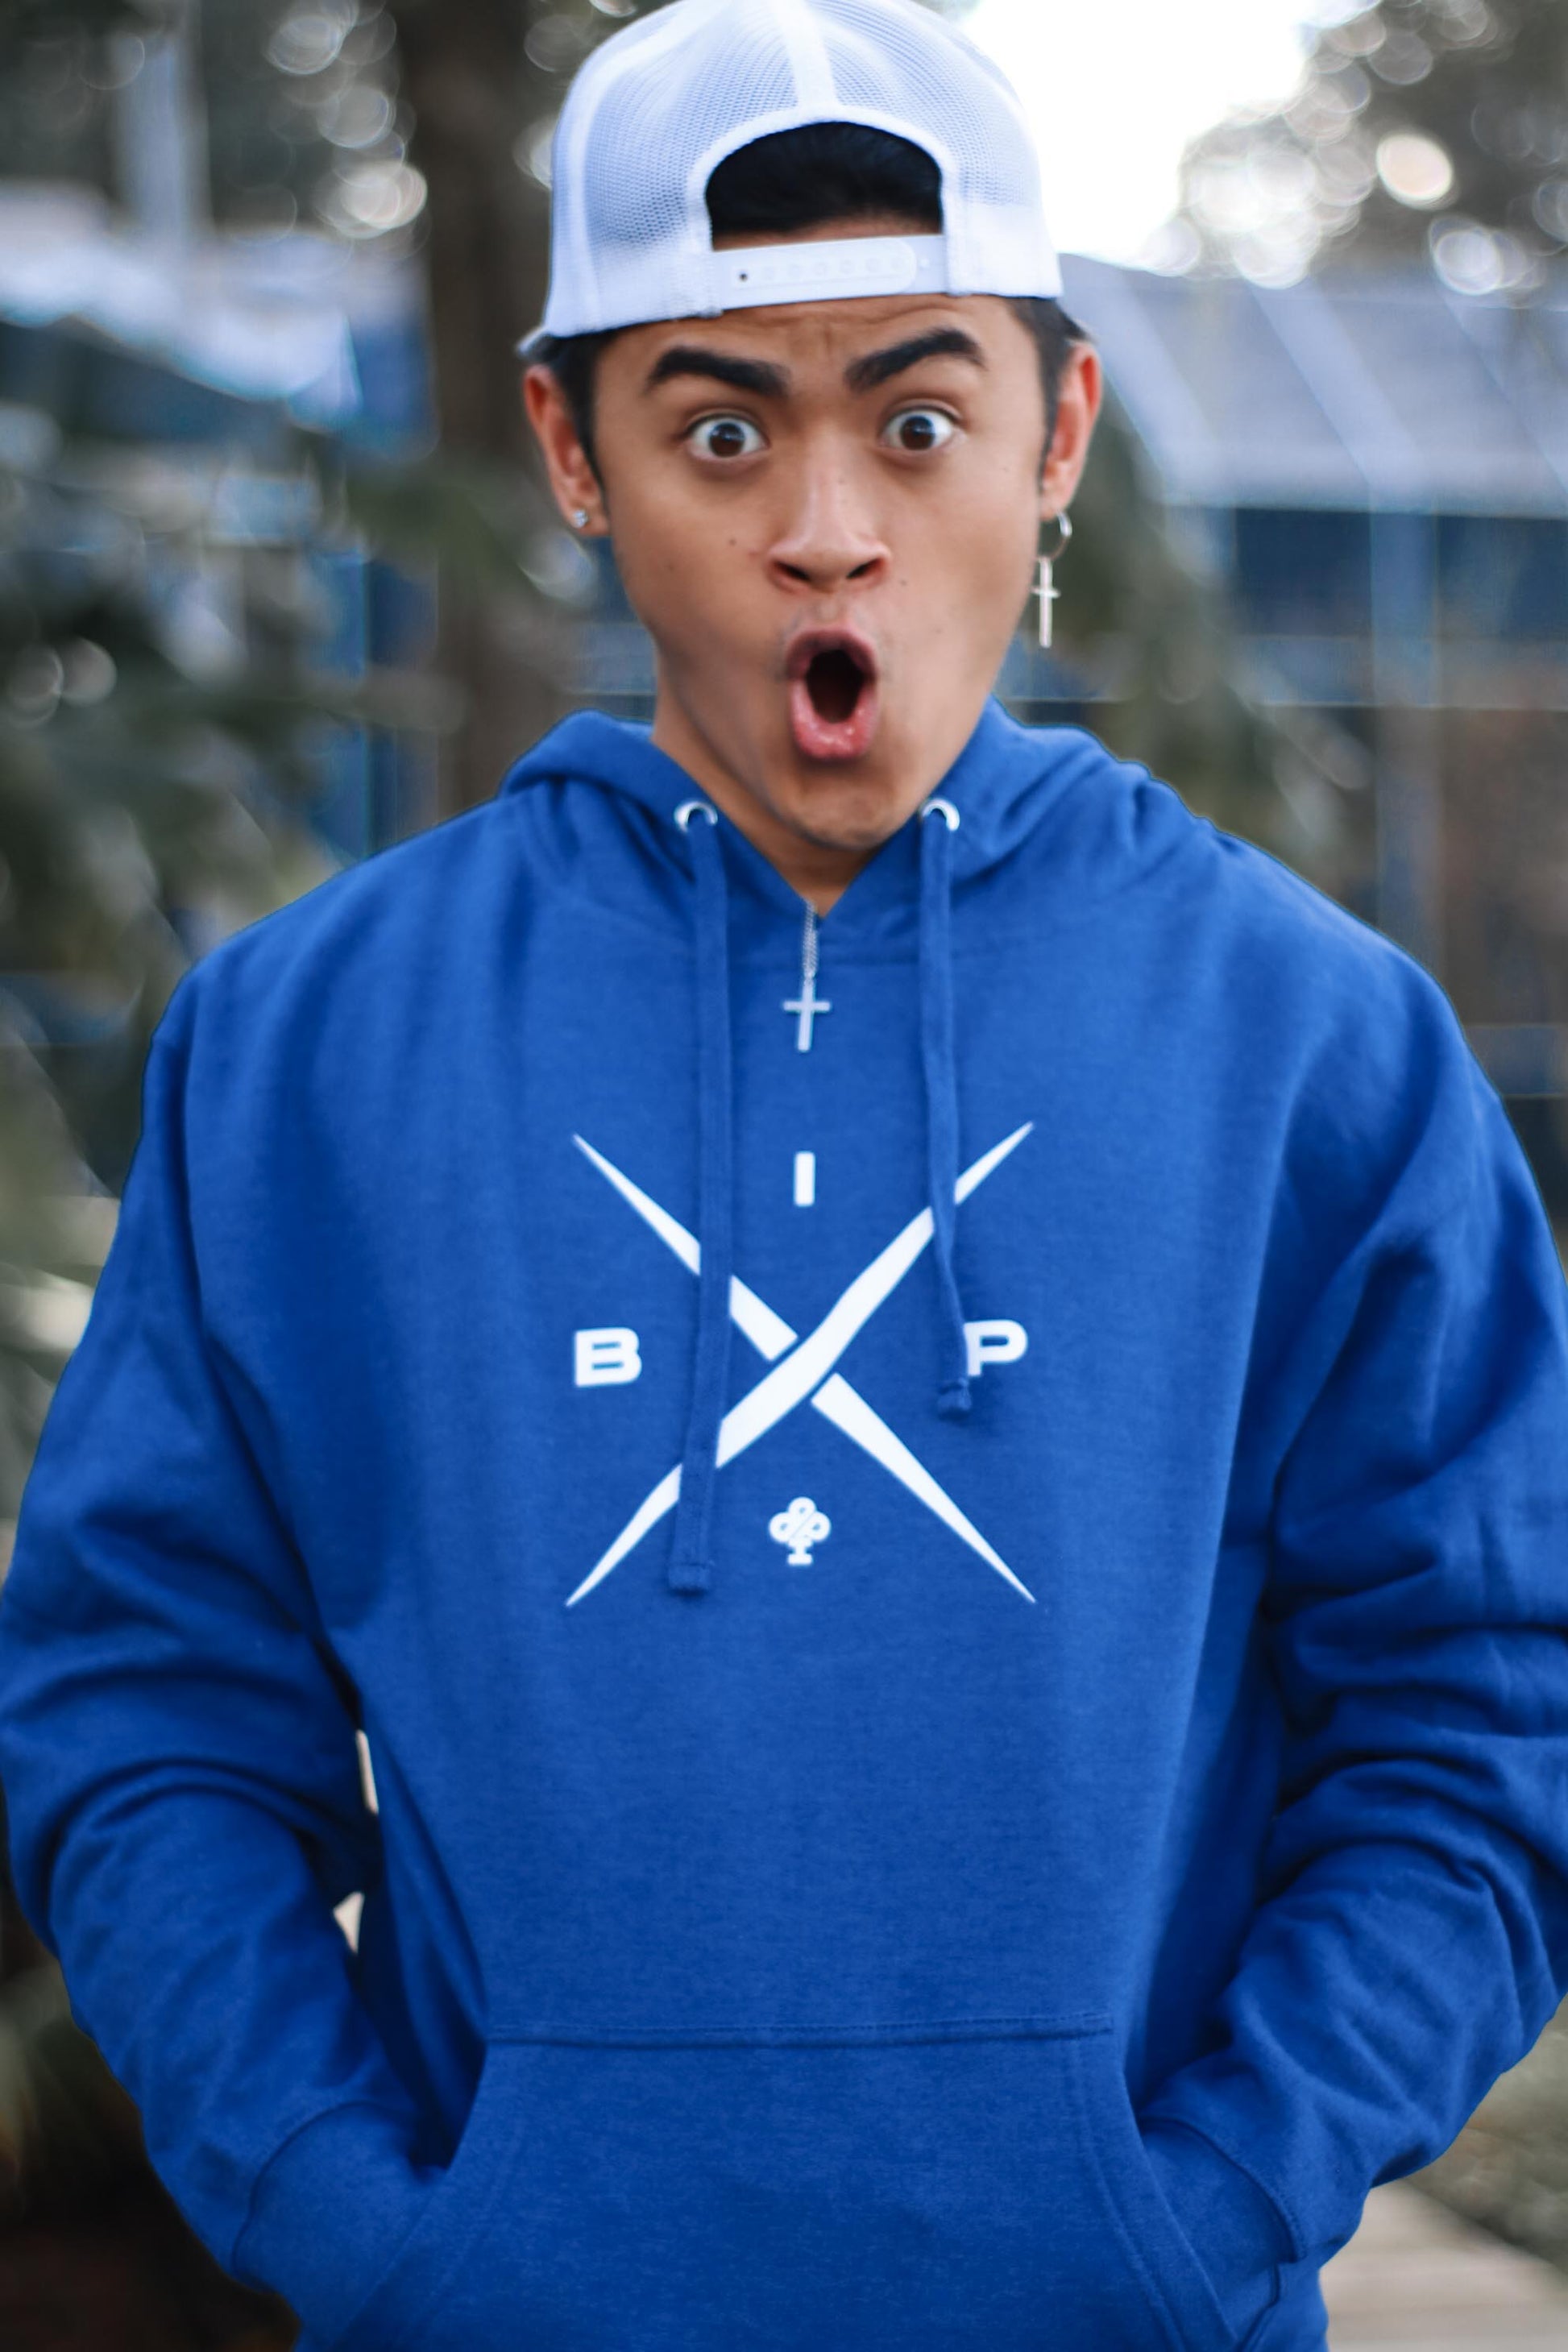 X Logo 2.0  om a royal blue  Premium dry fit hoodie by Ireland Boys productions viral youtube channel featuring Ricky Ireland